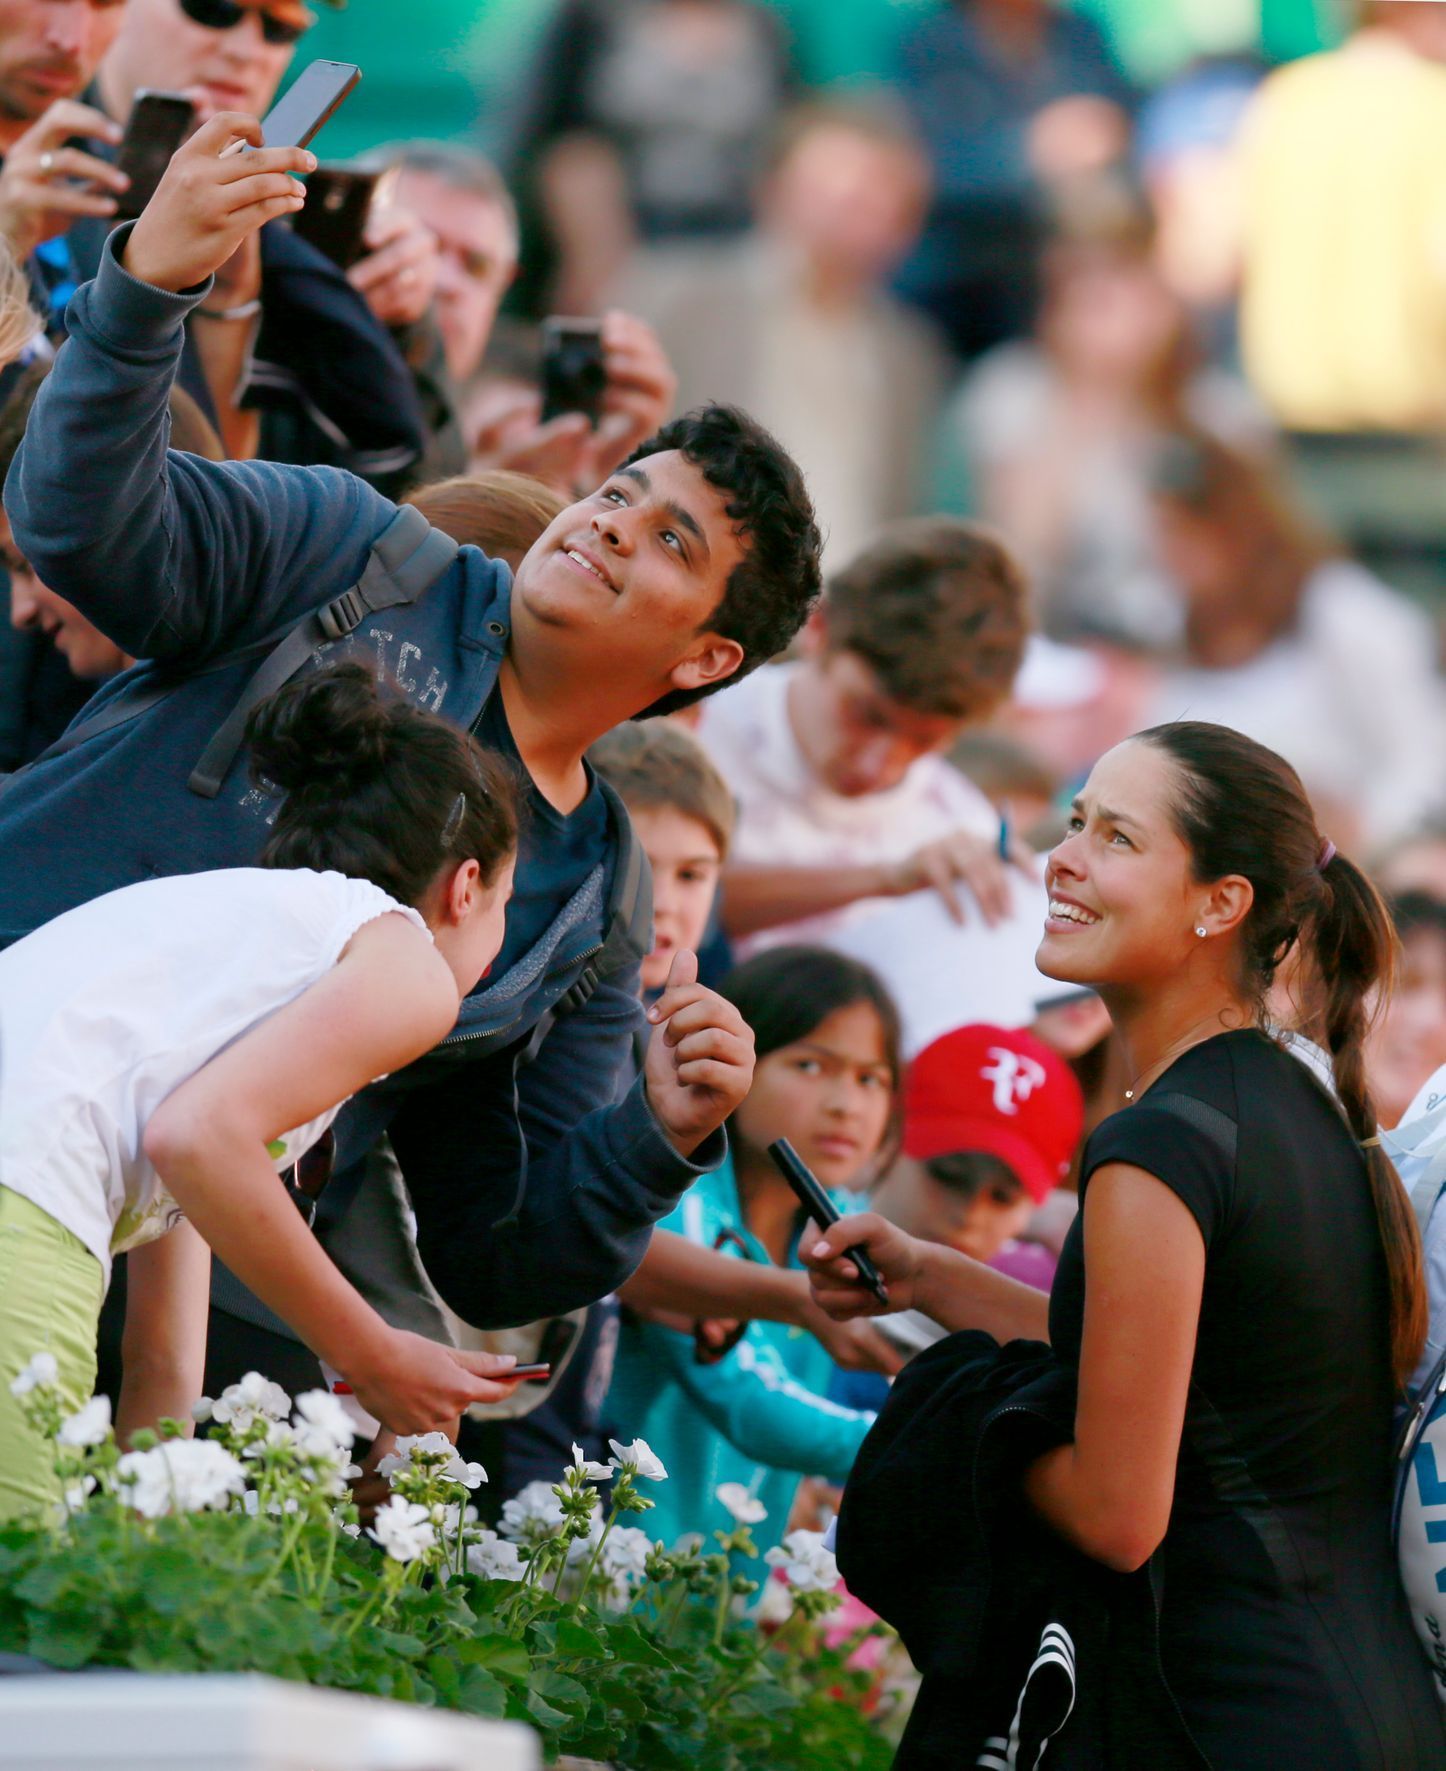 Tennis: Women's Singles - Serbia's Ana Ivanovic poses for a selfie with a fan after winning her first round match